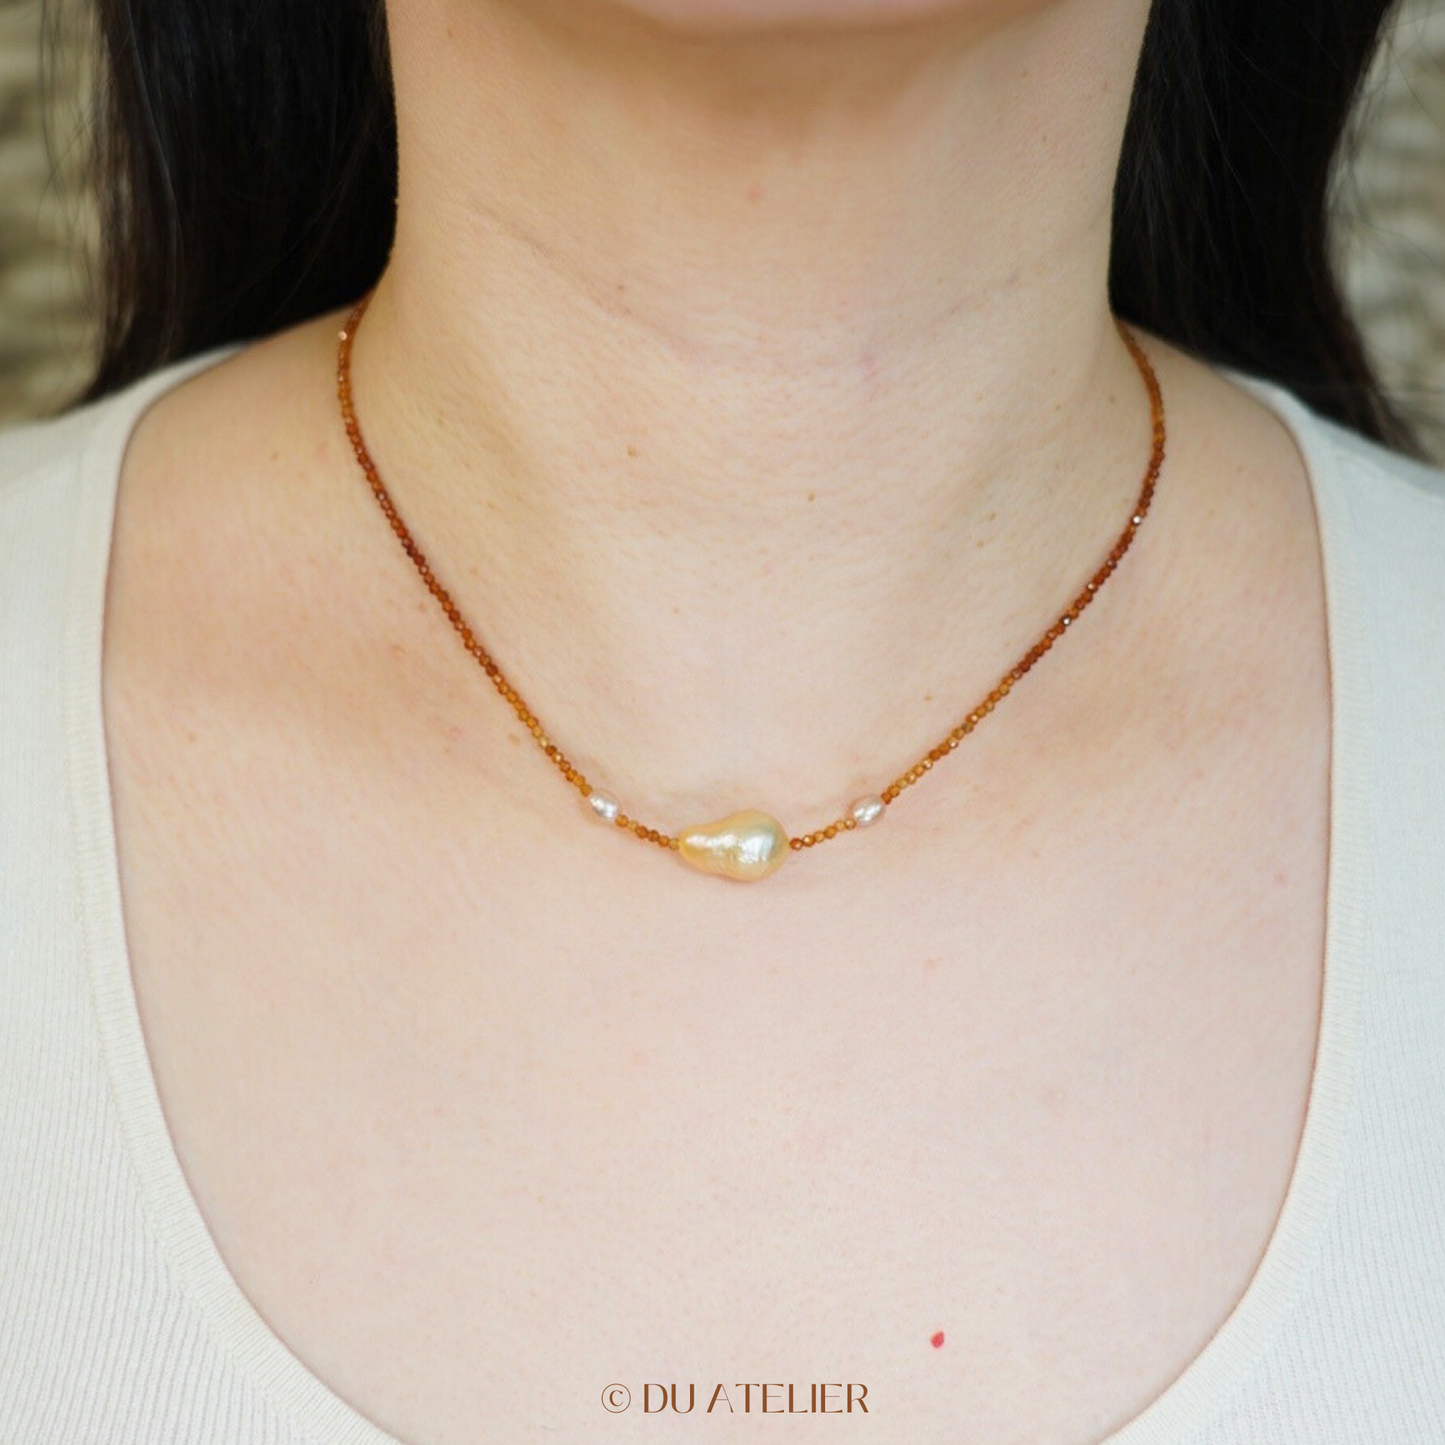 Natural Gold Baroque Pearl with Orange Garnet Necklace